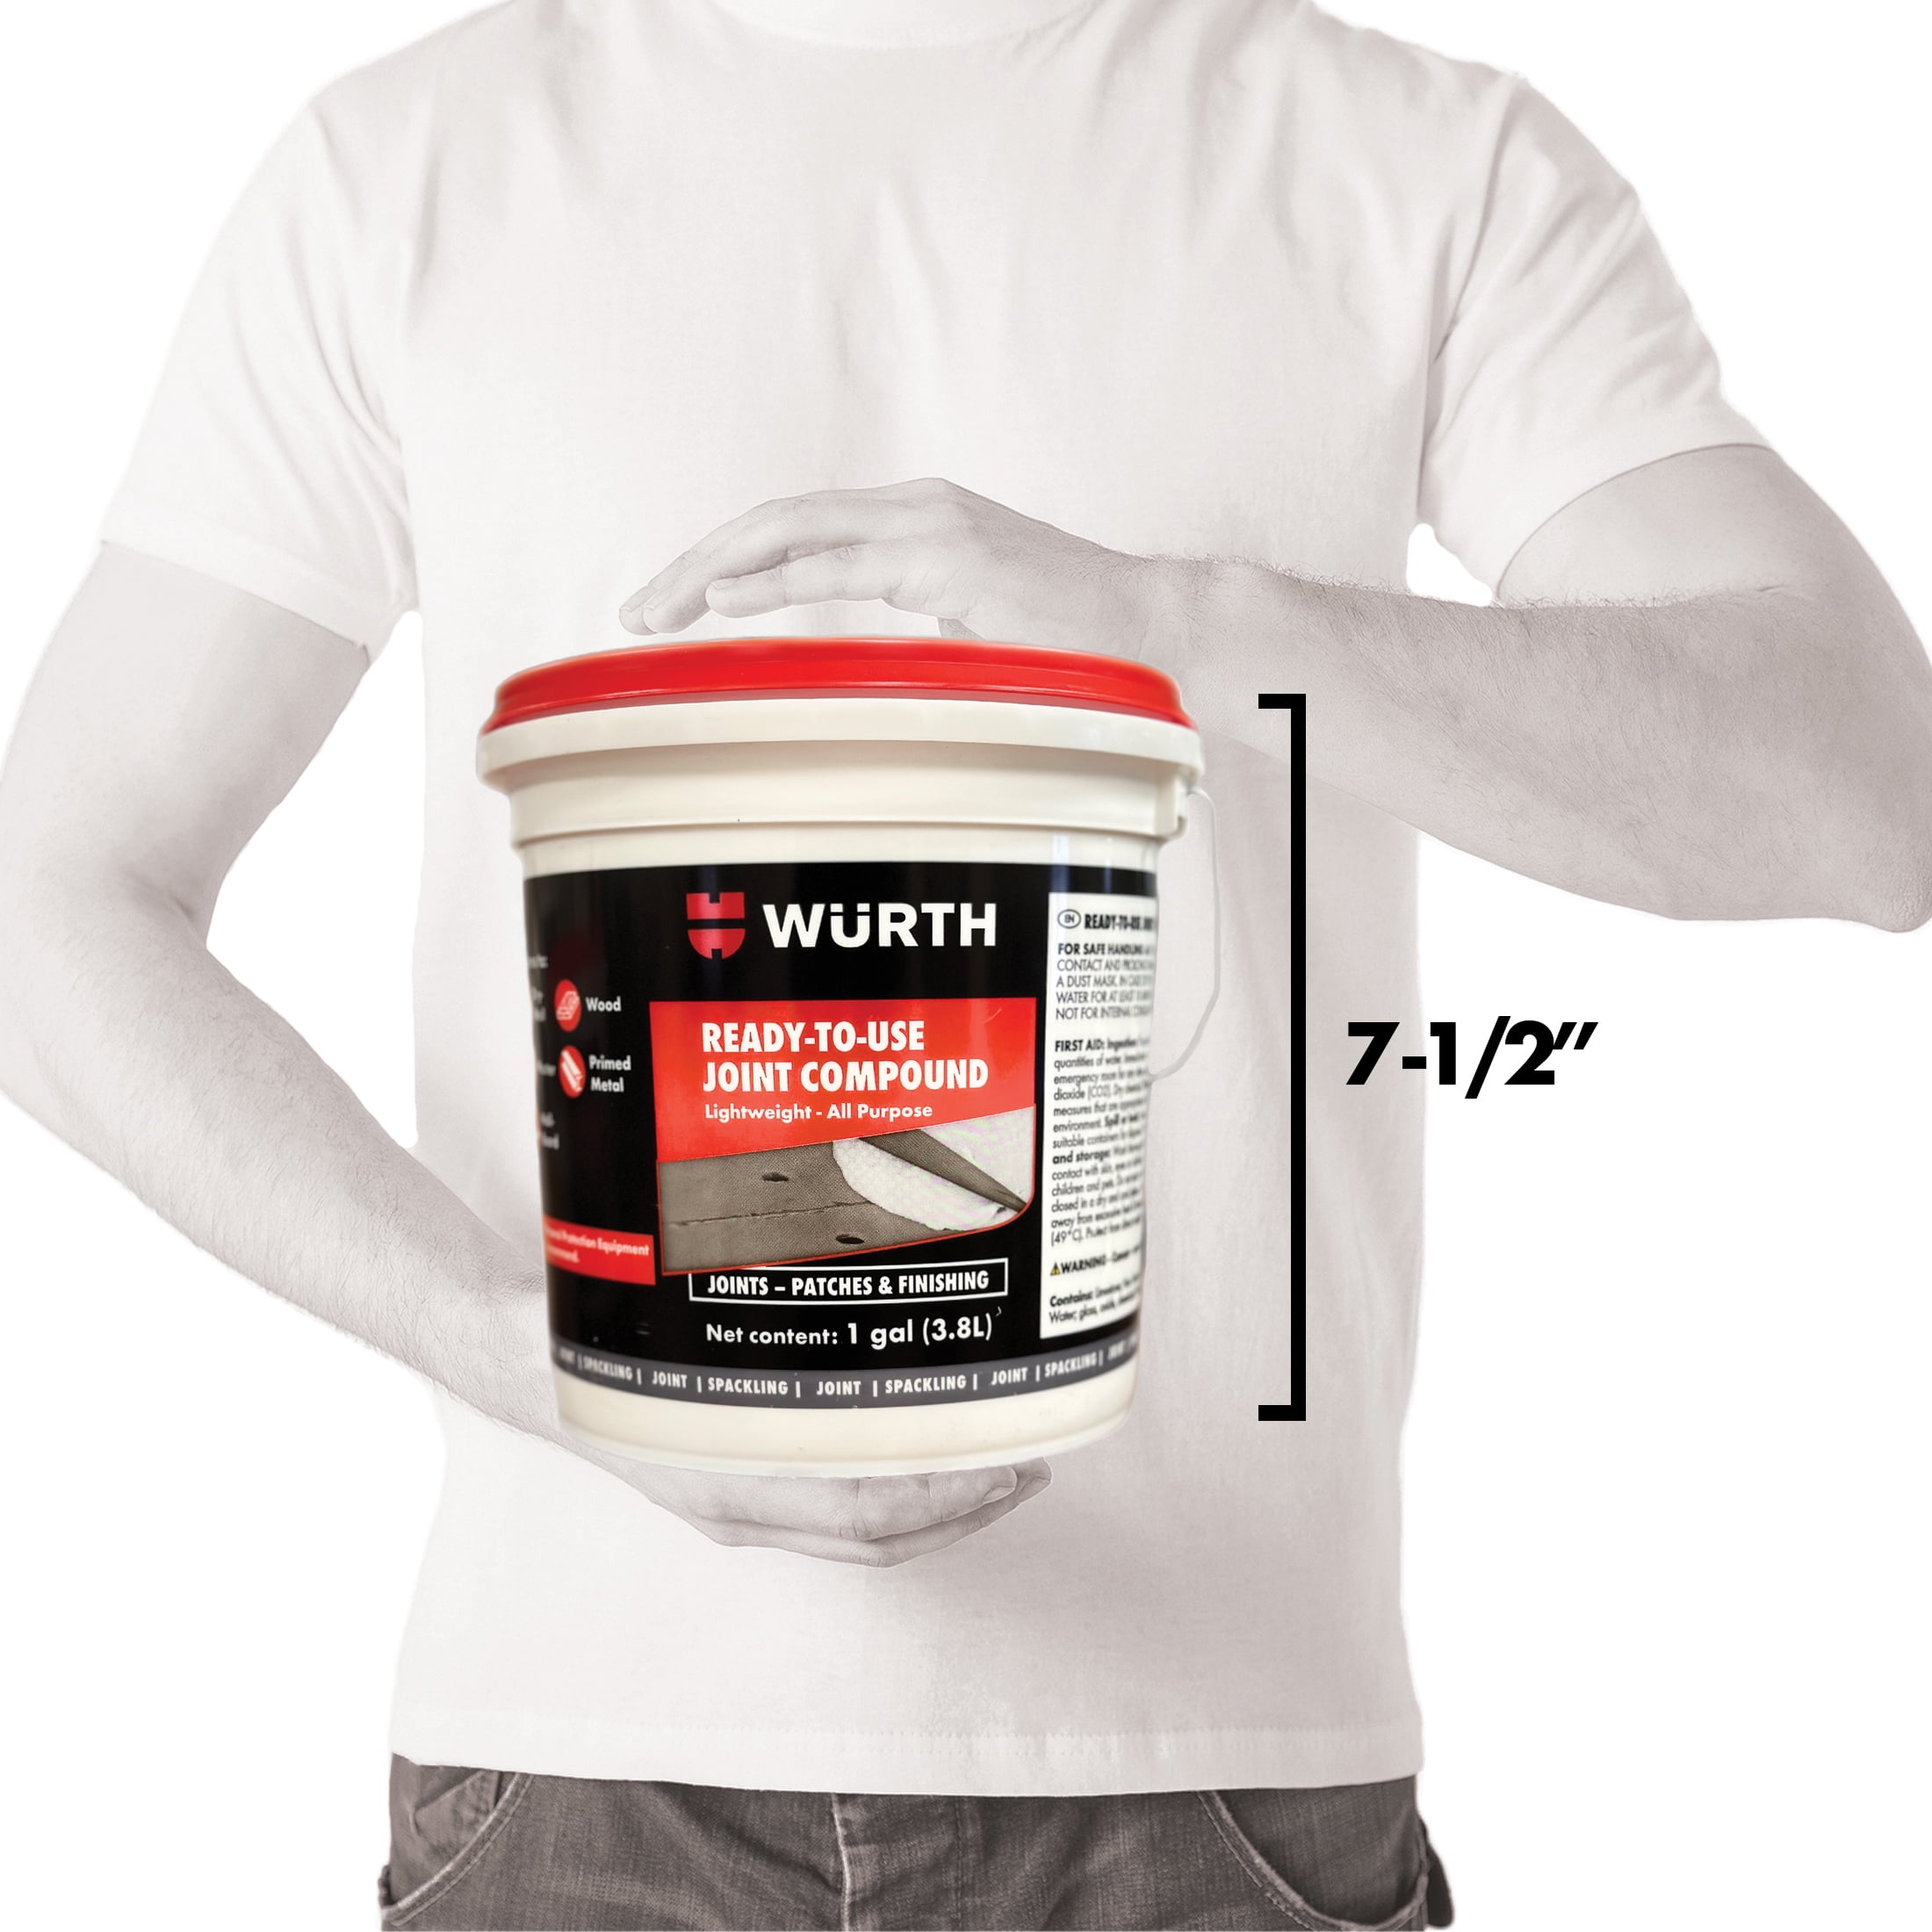 Wurth Ready-to-Use Lightweight Joint Compound, 1 Gallon 